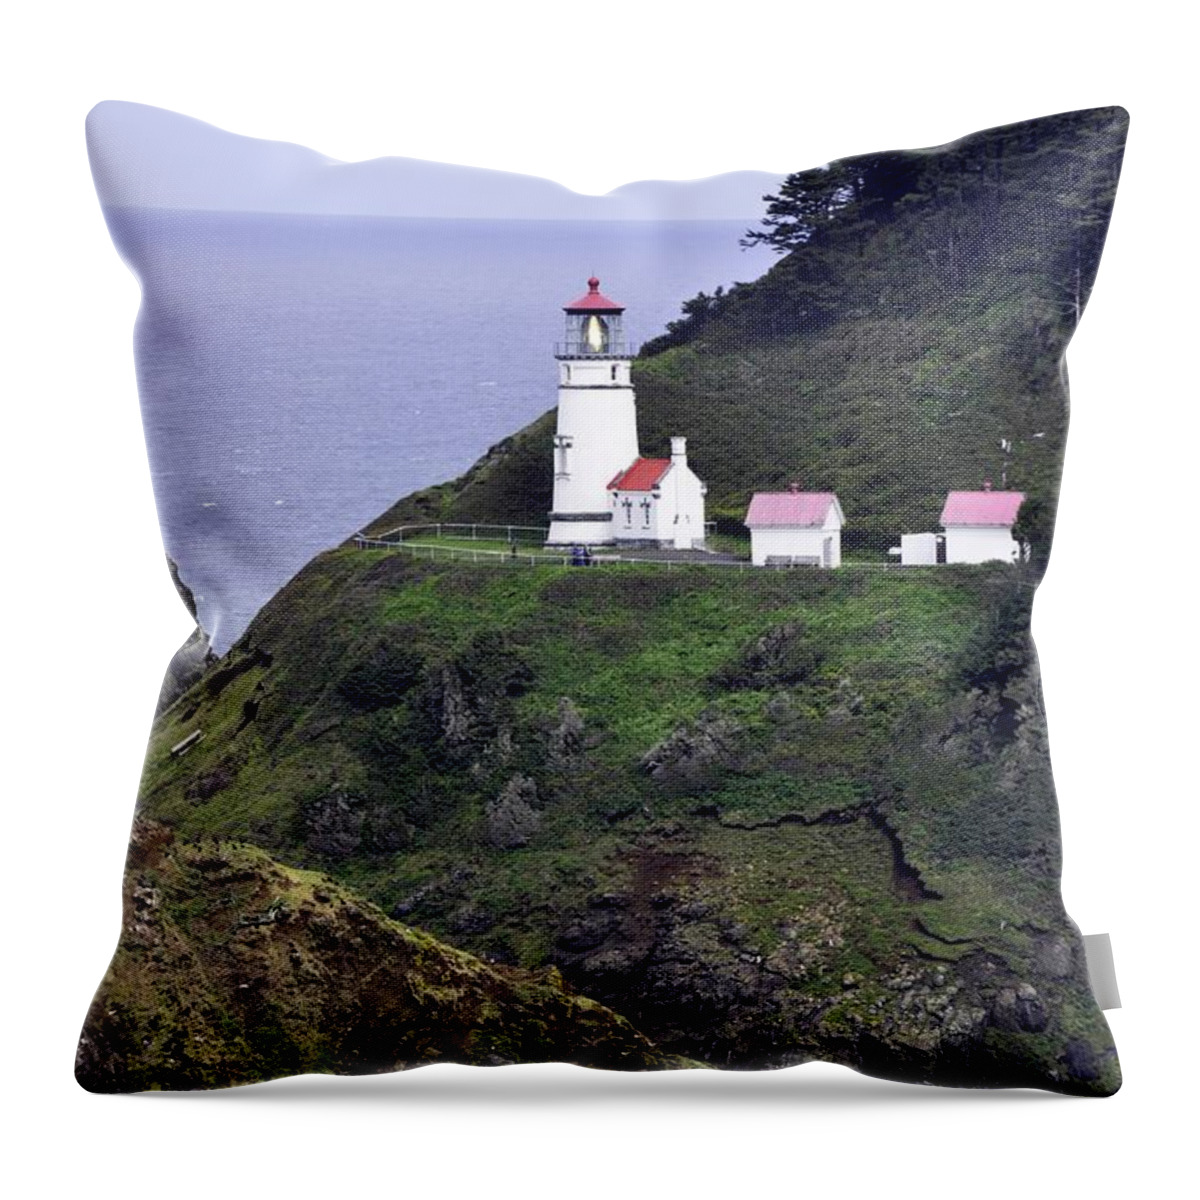 Heceta Head Throw Pillow featuring the photograph The Scenic Lighthouse by Image Takers Photography LLC - Laura Morgan